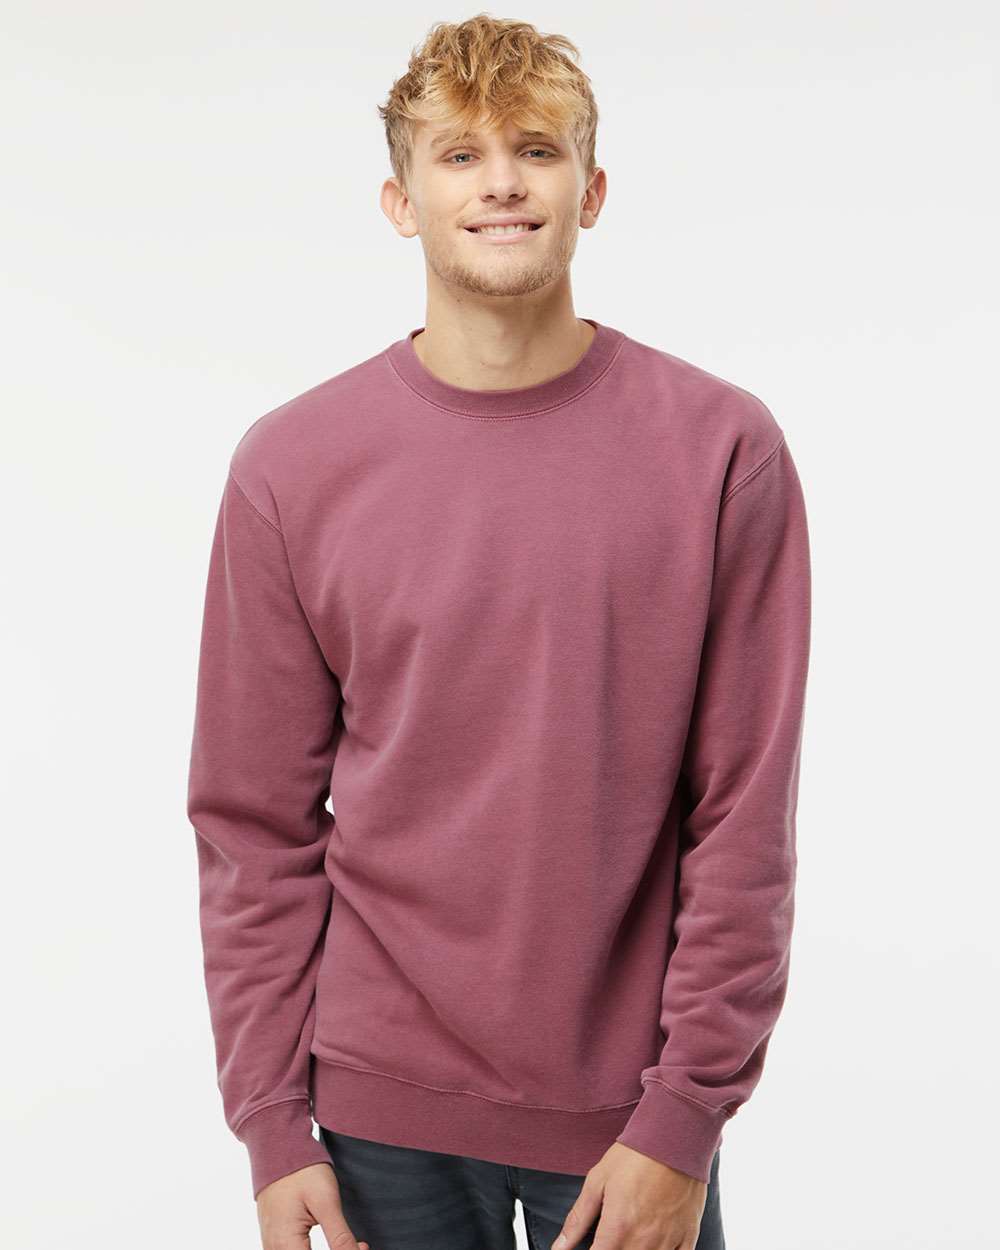 Independent Trading Co. PRM3500 - Midweight Pigment-Dyed Crewneck